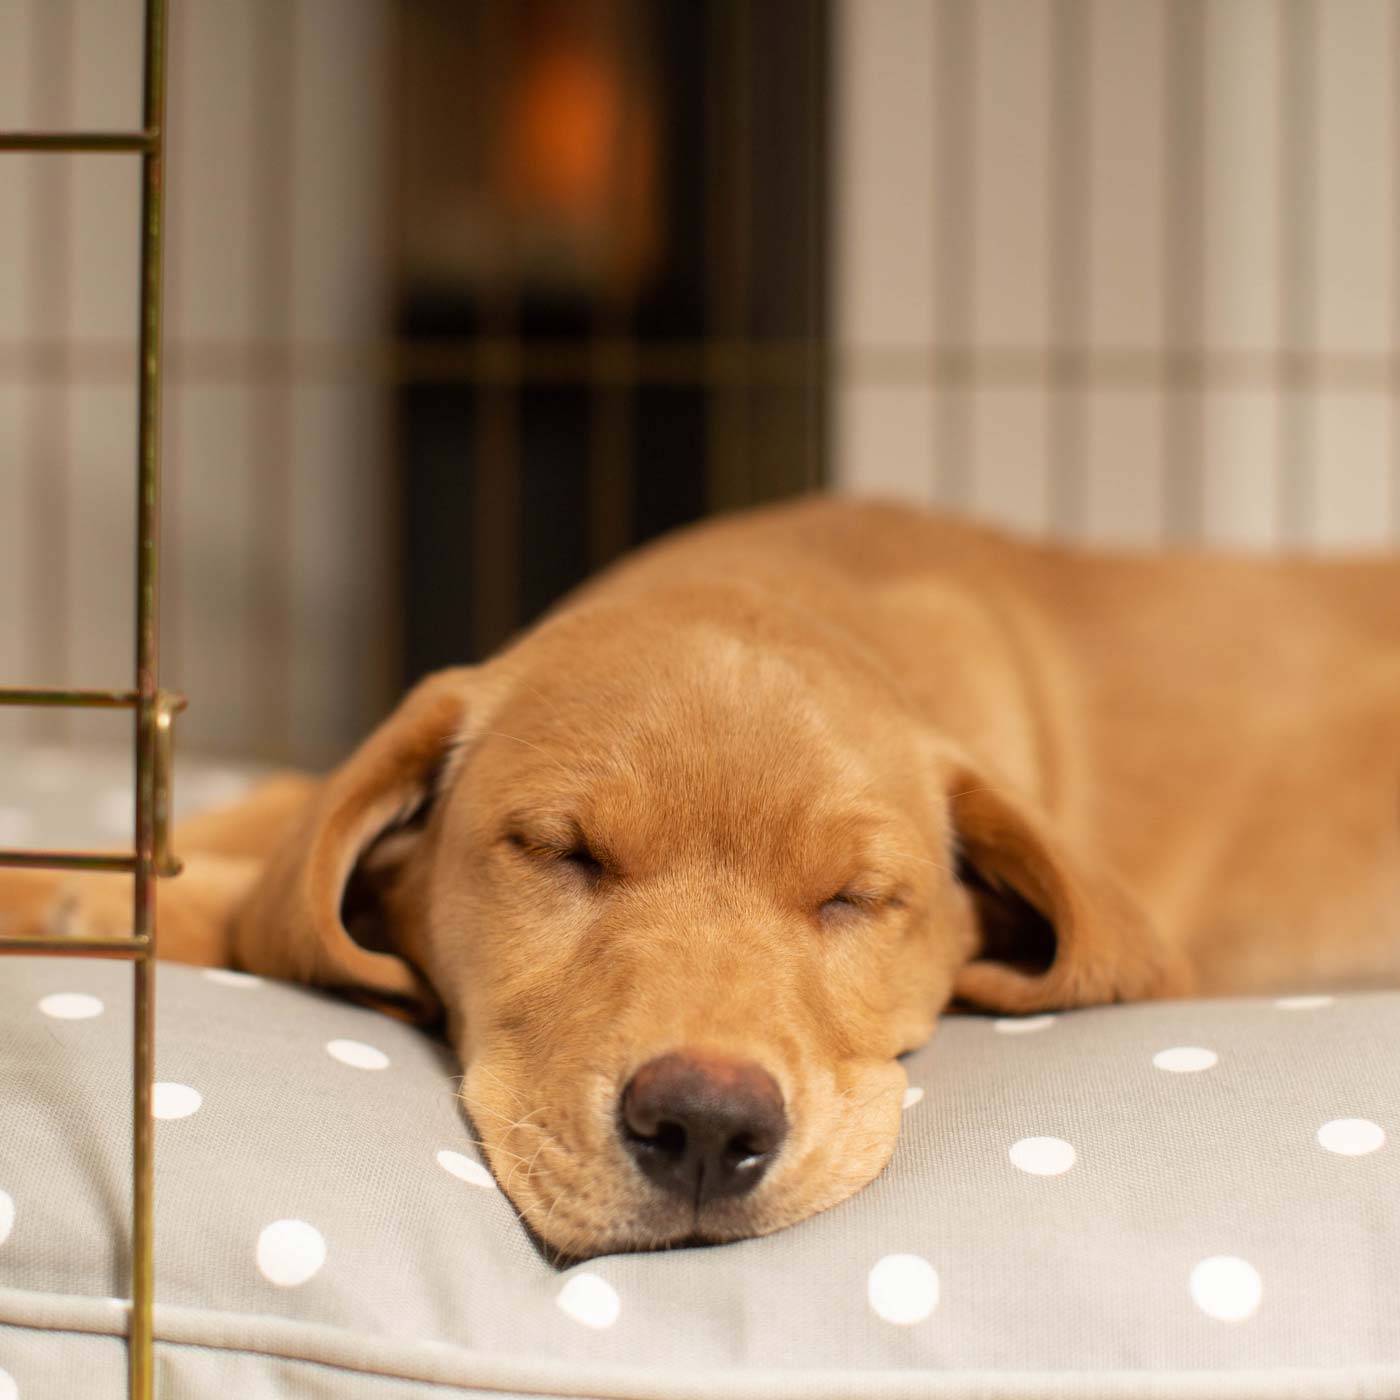 Luxury Gold Dog Cage Set With Cushion, Bumper and Crate Cover. The Perfect Dog Crate For The Ultimate Naptime, Available Now at Lords & Labradors US